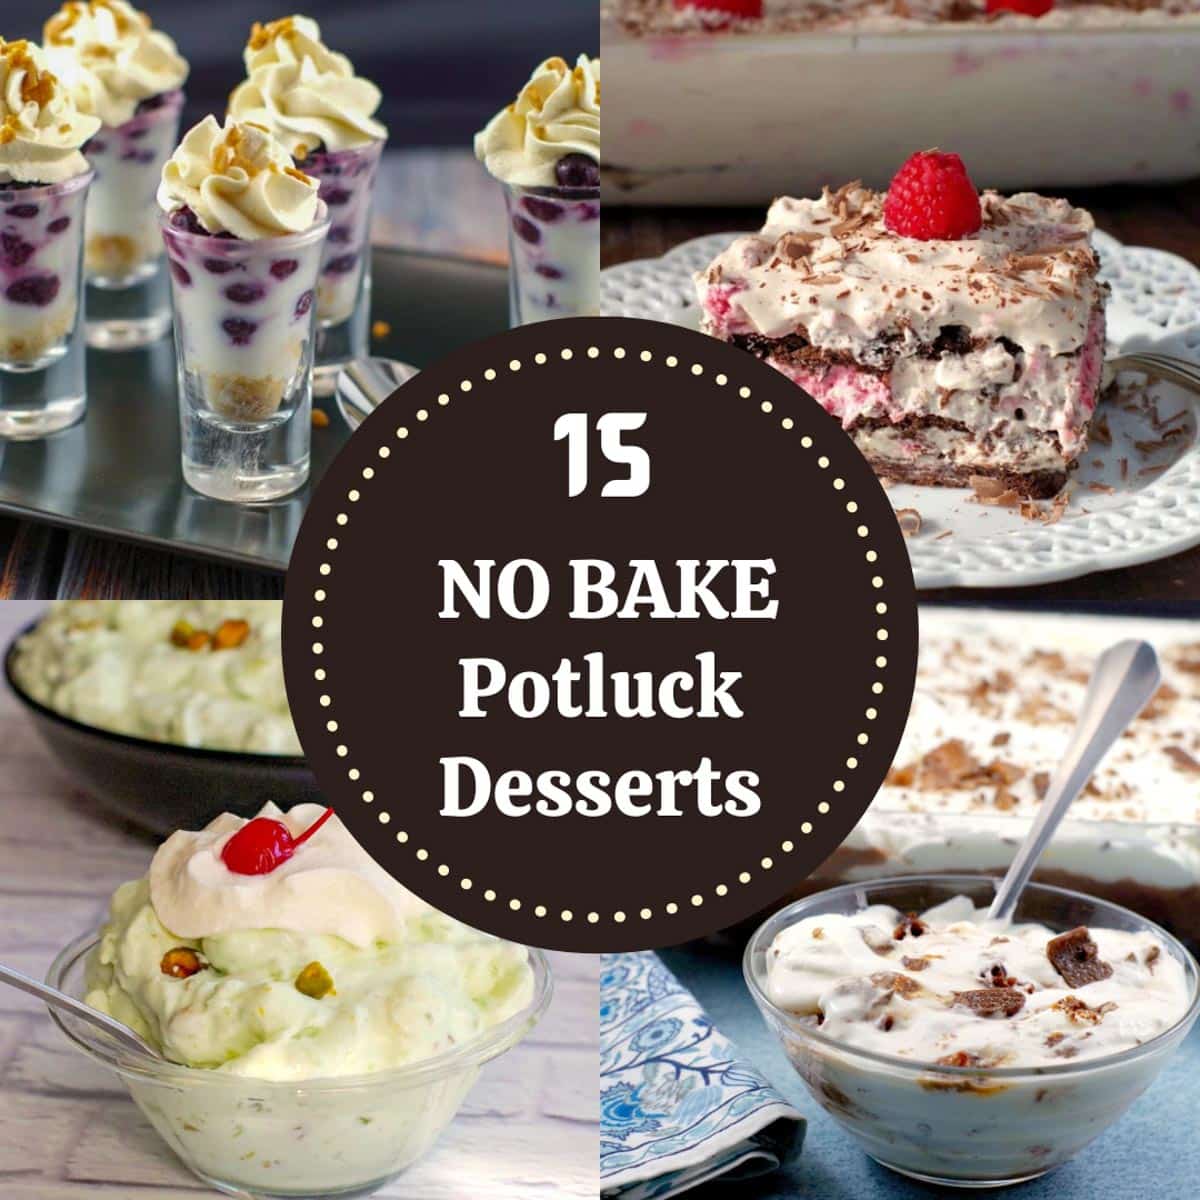 A collage of 4 photos of no bake potluck desserts with white text on a brown surfact